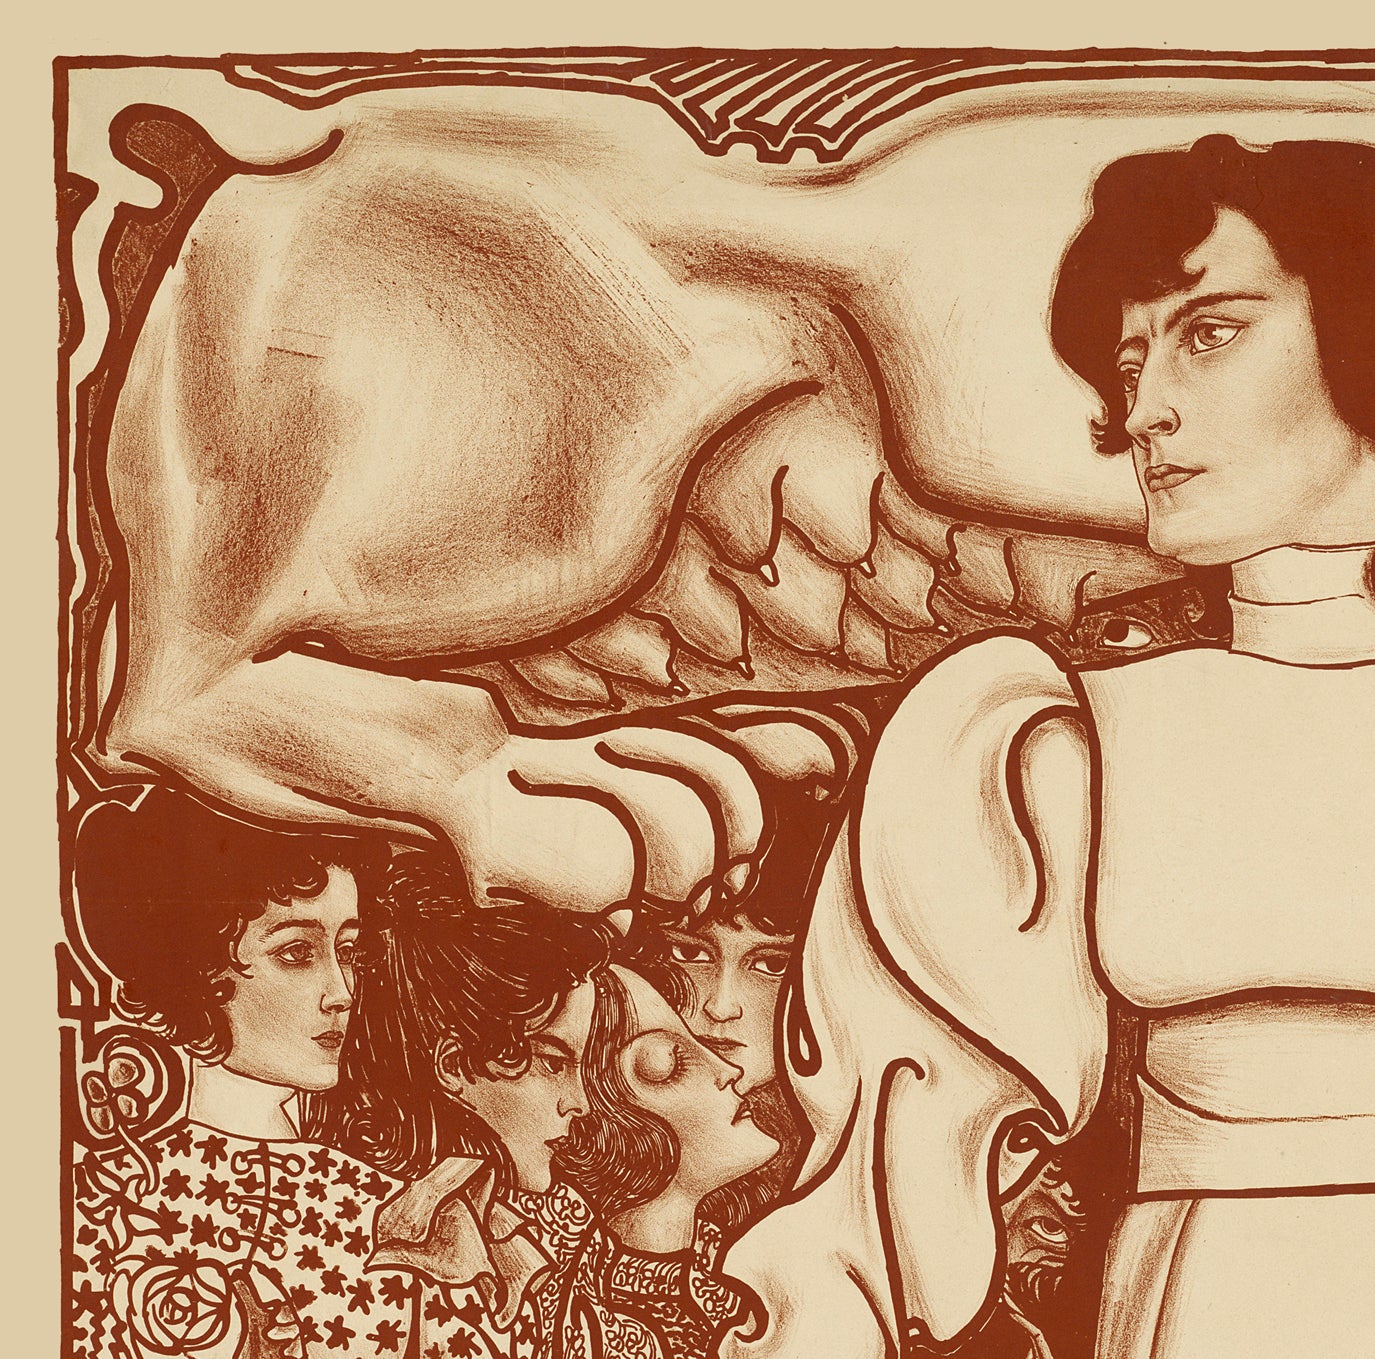 Labor for the Women Vintage Poster by Jan Toorop